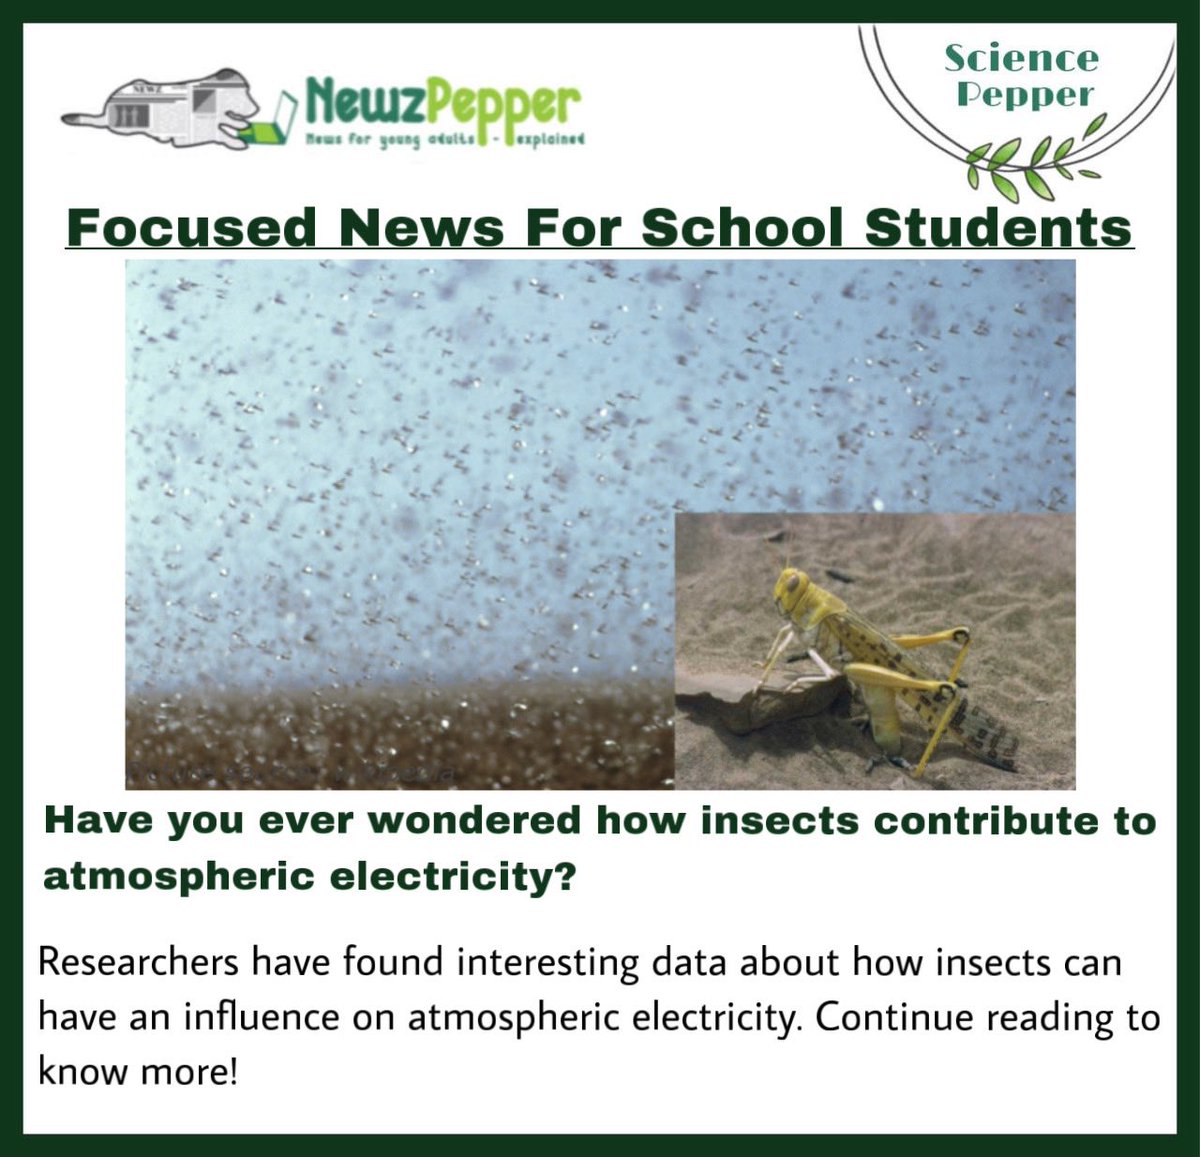 To read the full article, visit newzpepper.com!

#indianschools #news #newsupdate #newspaper #dailynews #dailynewspaper #follow #instadaily #instagram #insects #electricalcharge #electric #energy #atmosphericelectricity